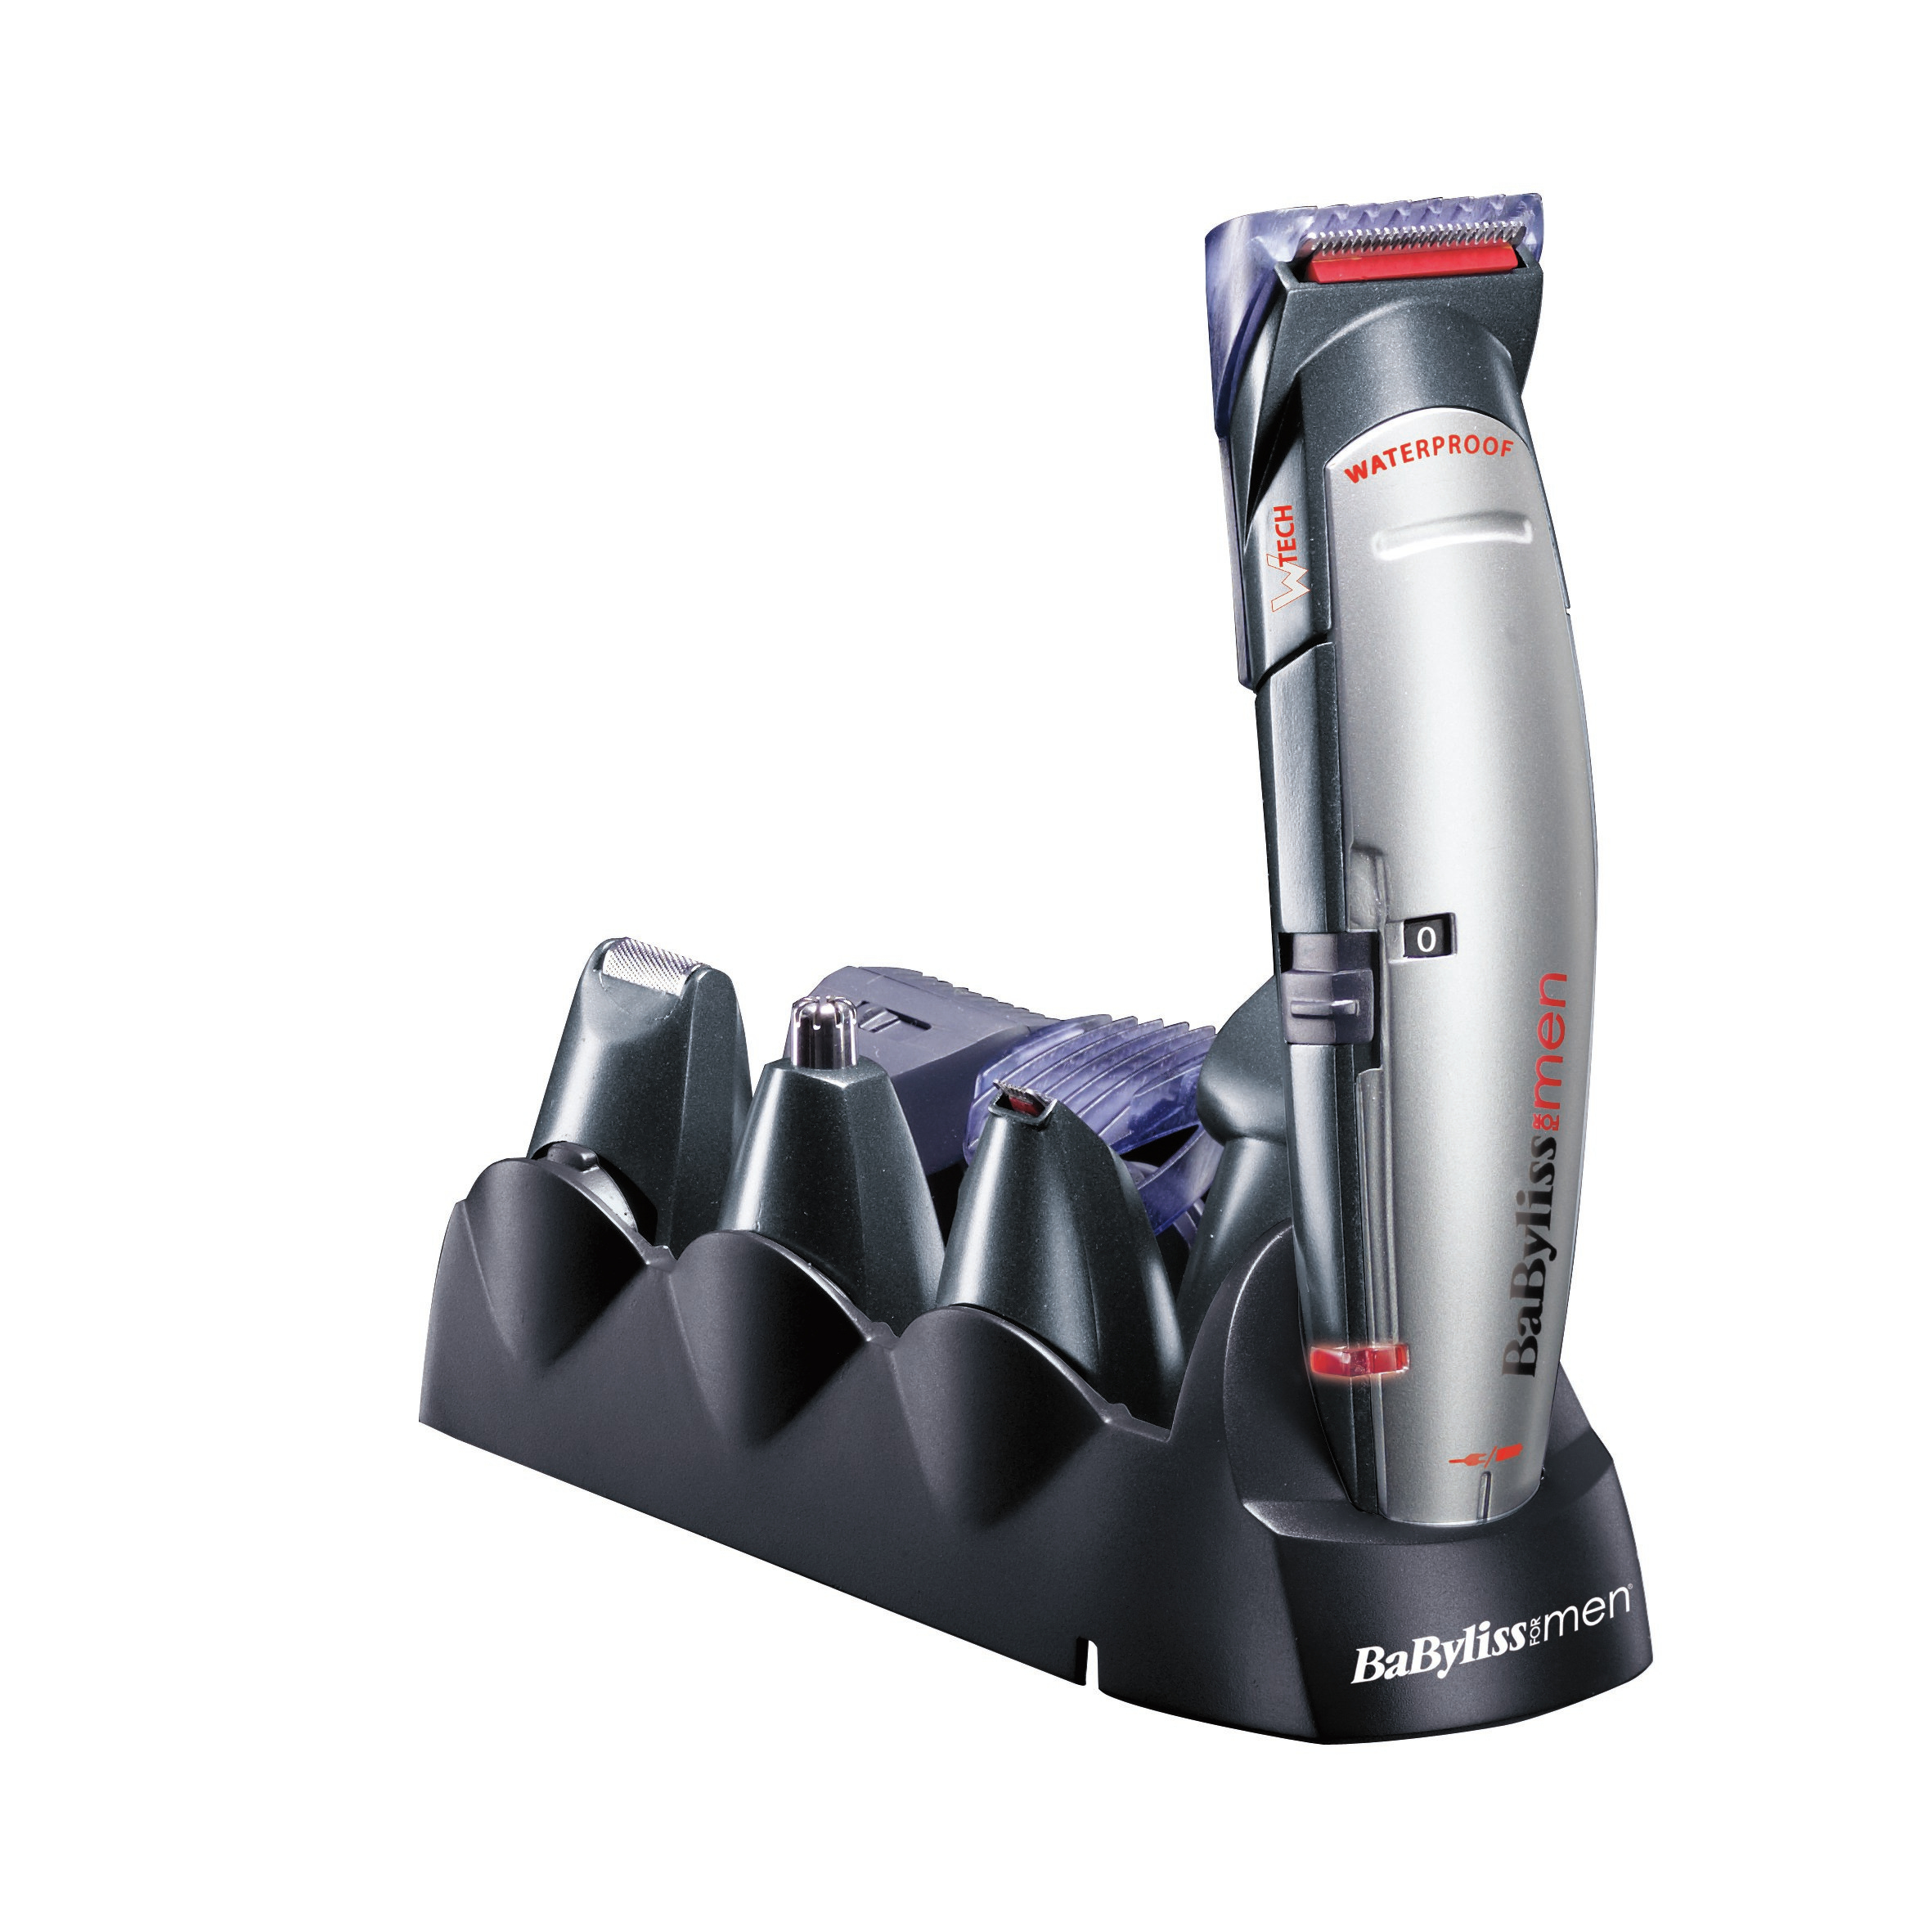 Babyliss Multifunktionstrimmer 10 in W-tech 1